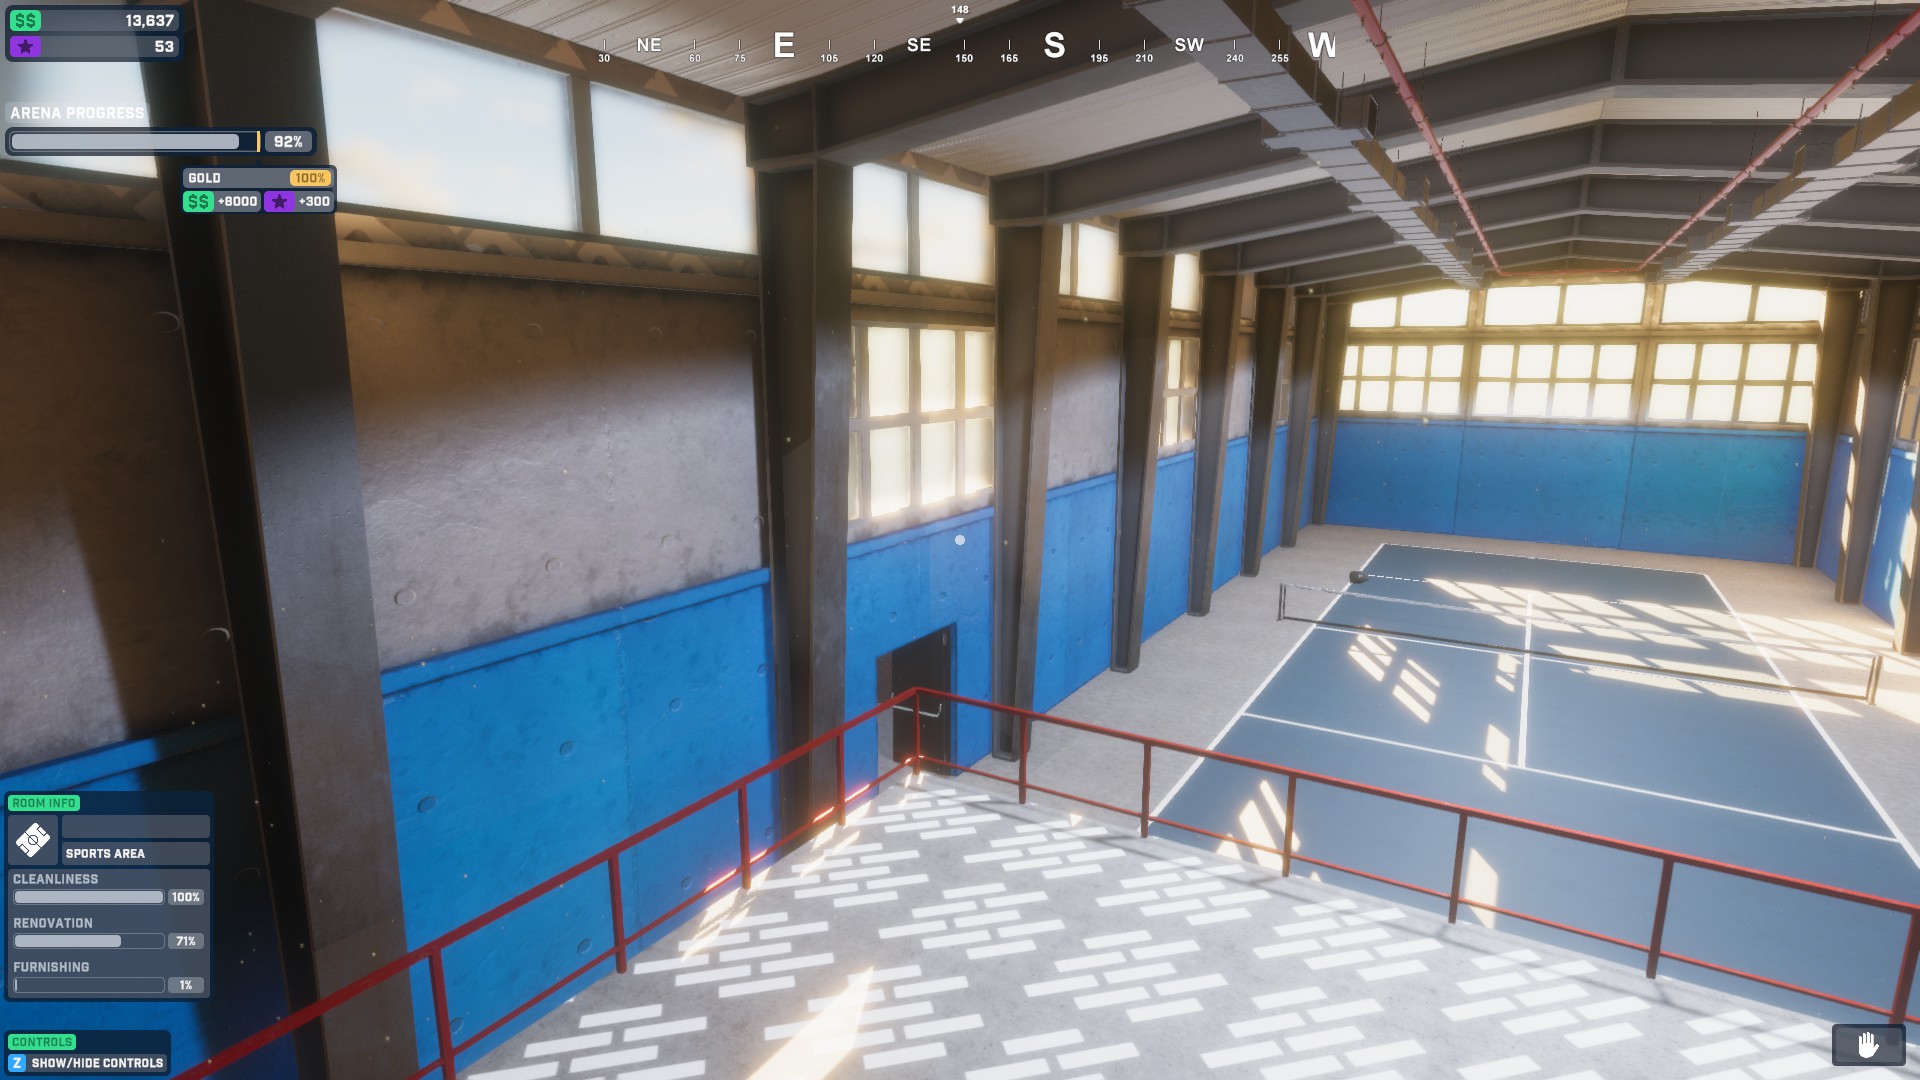 A large room with concrete walls and blue paint, a blue tennis court is shown near the lower area. tile symbols hightlight the area I need to place flooring.